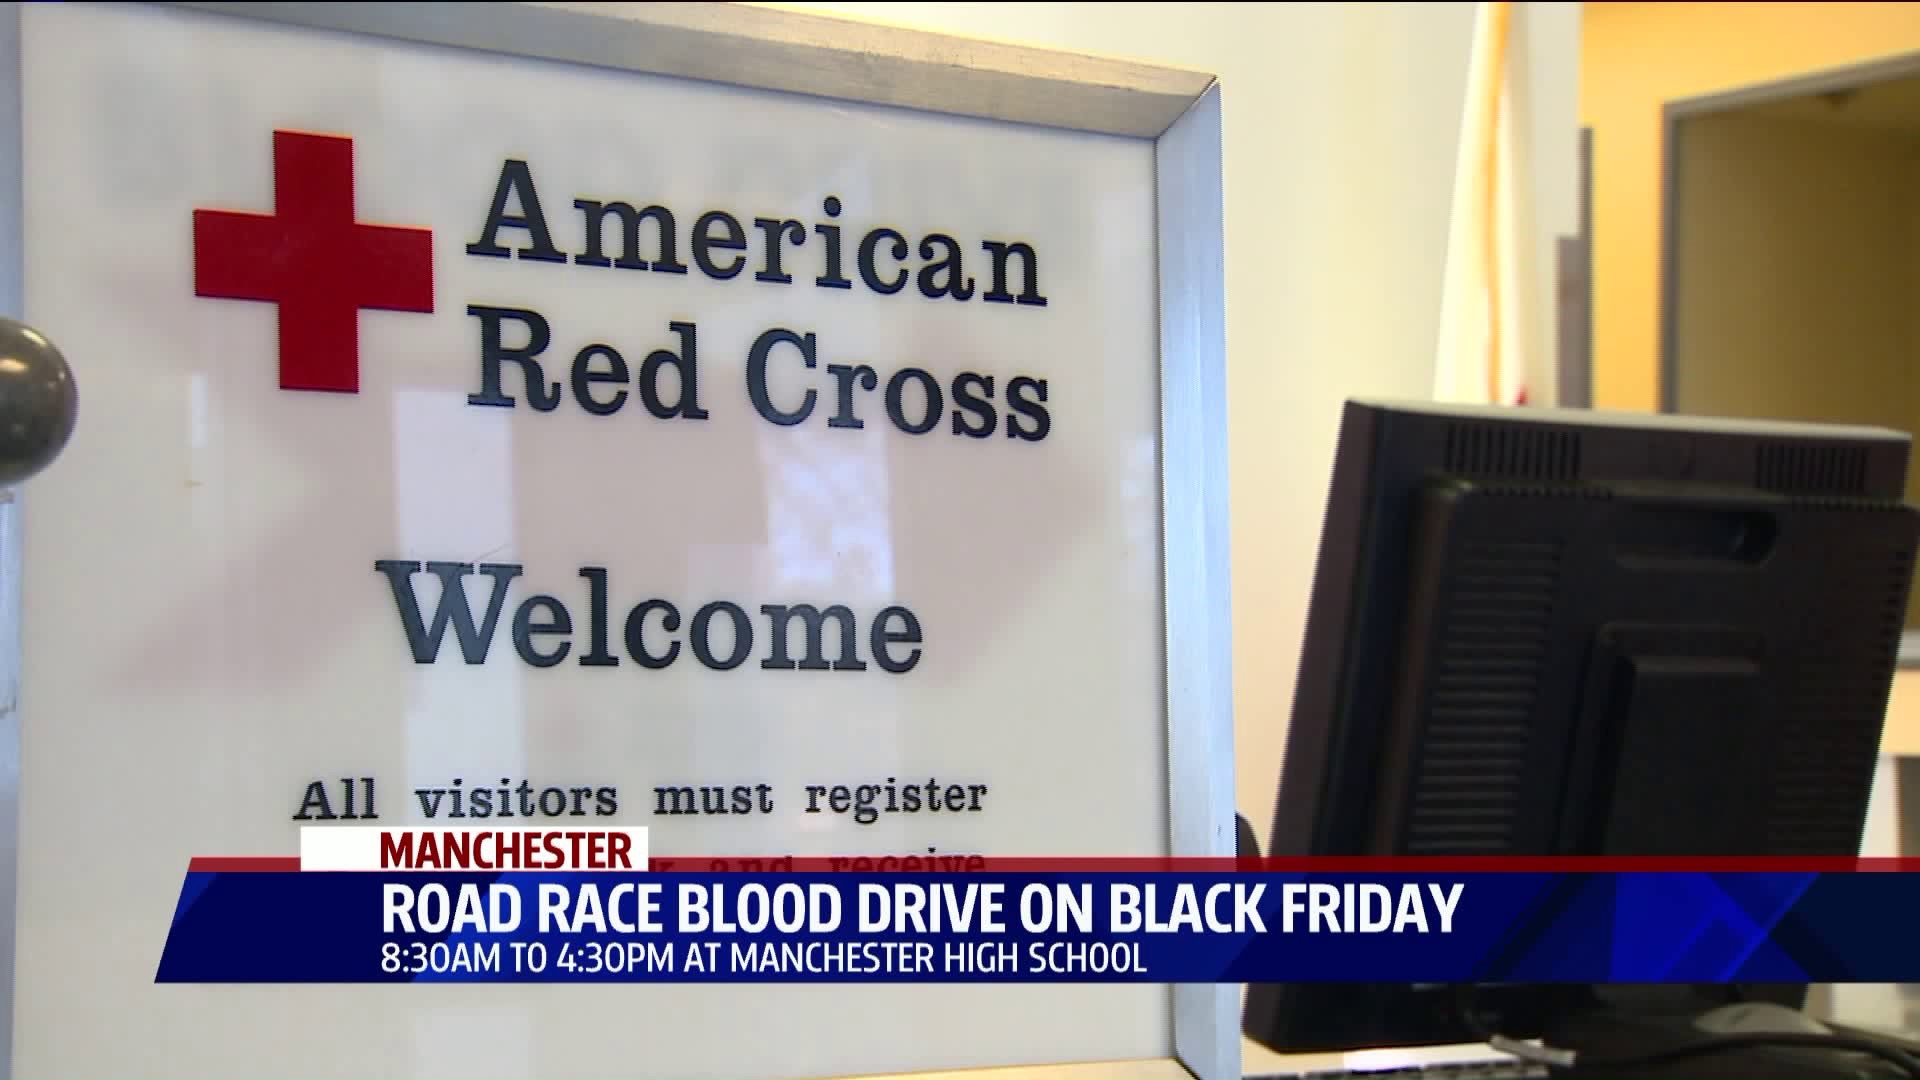 Black Friday blood drive in Manchester